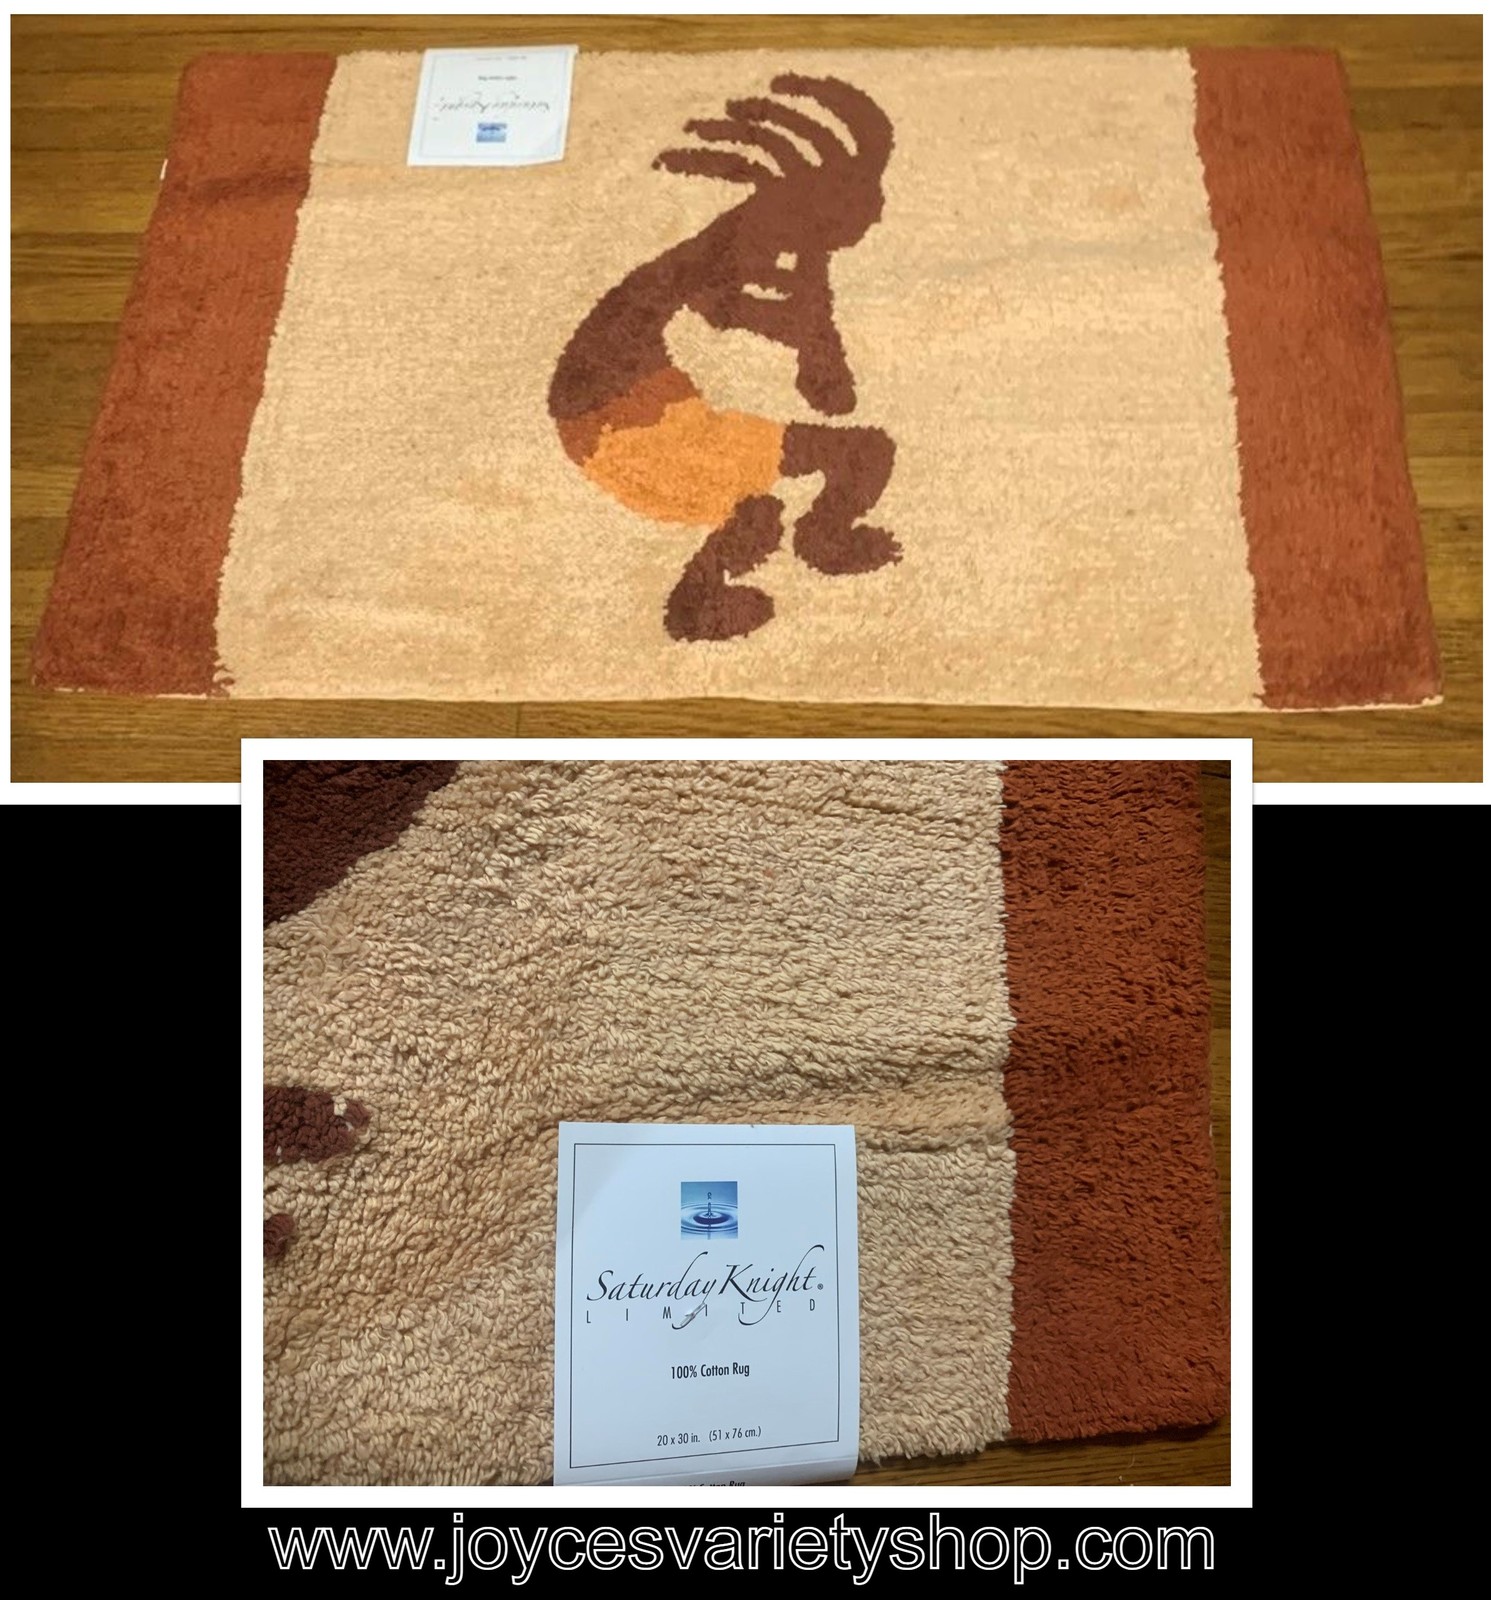 Primary image for Saturday Knight Limited Rug 100% Cotton 20" x 30" Kokopelli Dance